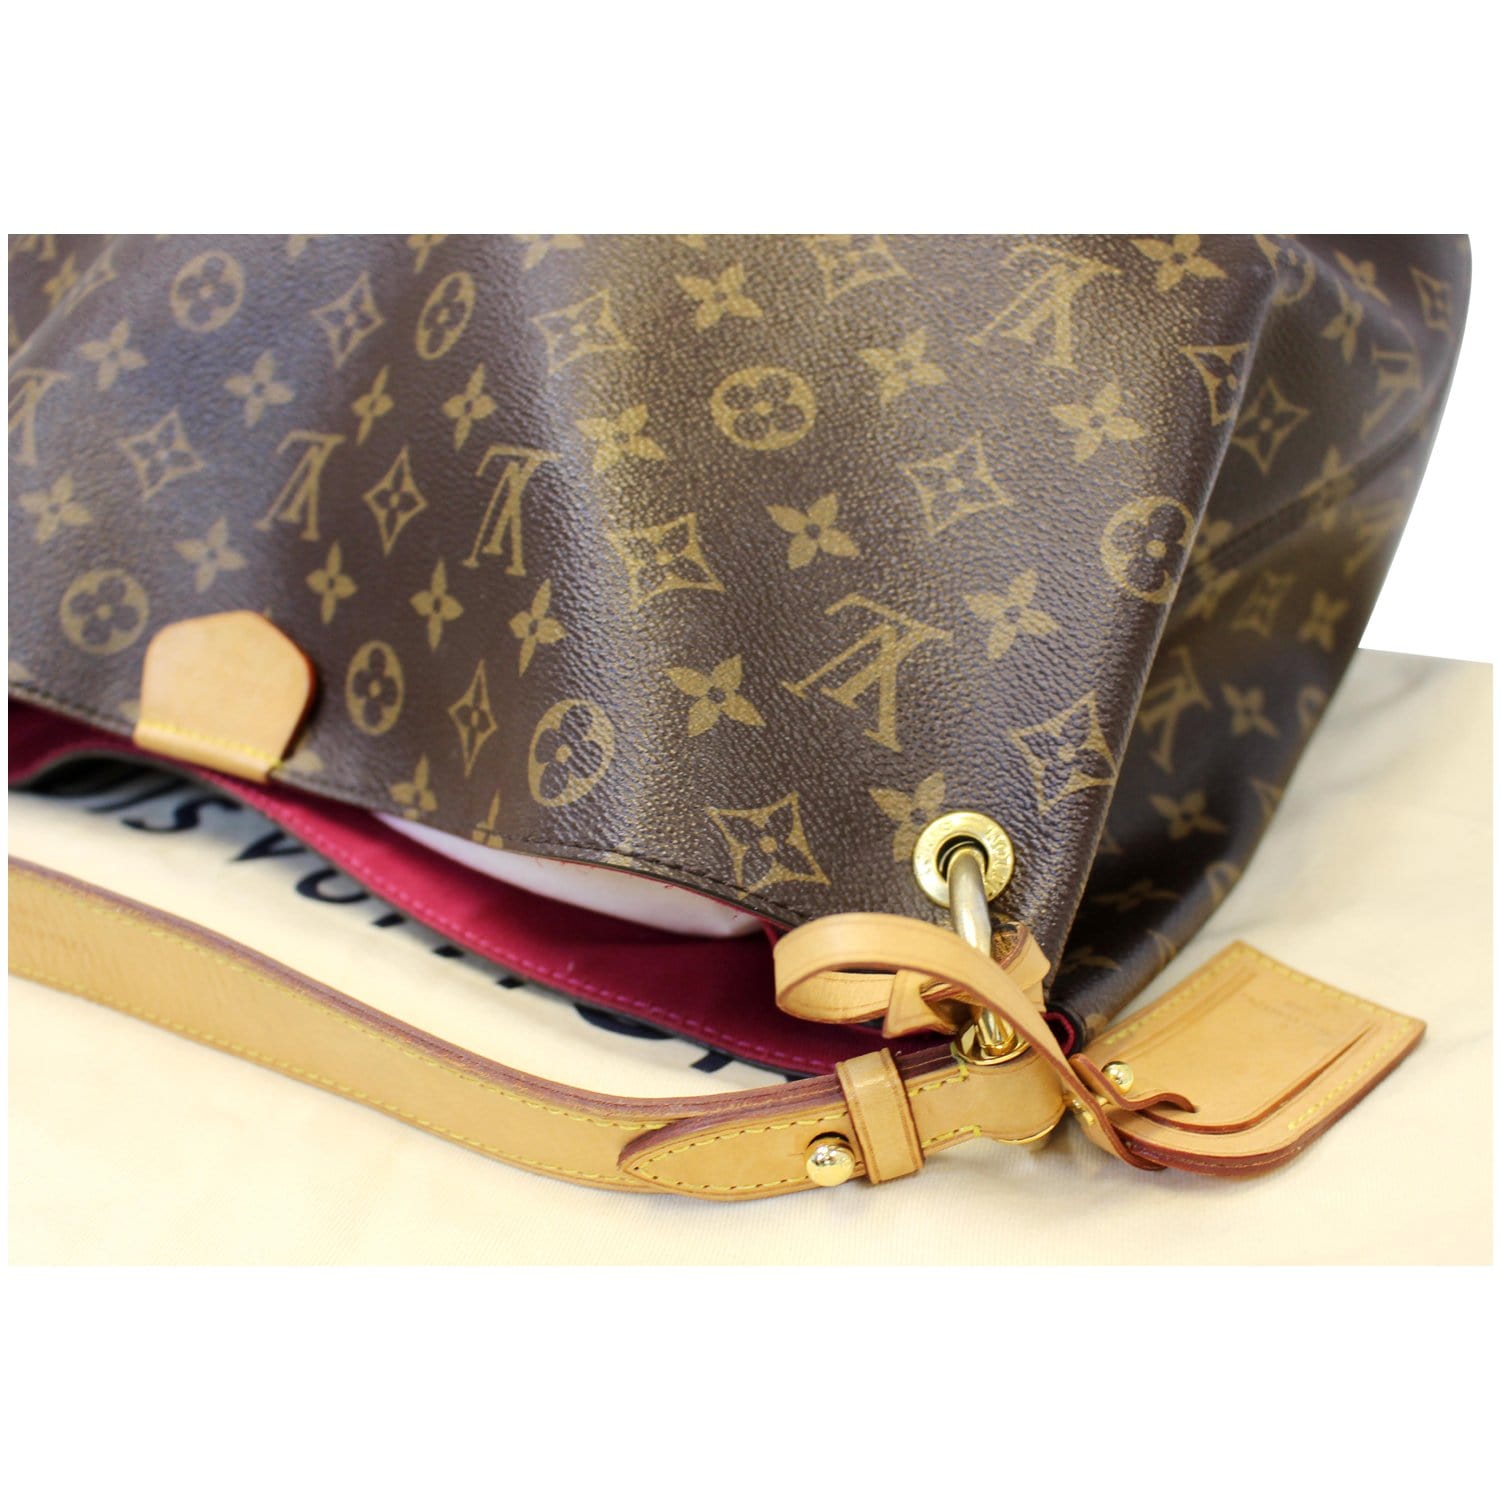 Louis Vuitton Graceful MM. (sold out online at the LV store)